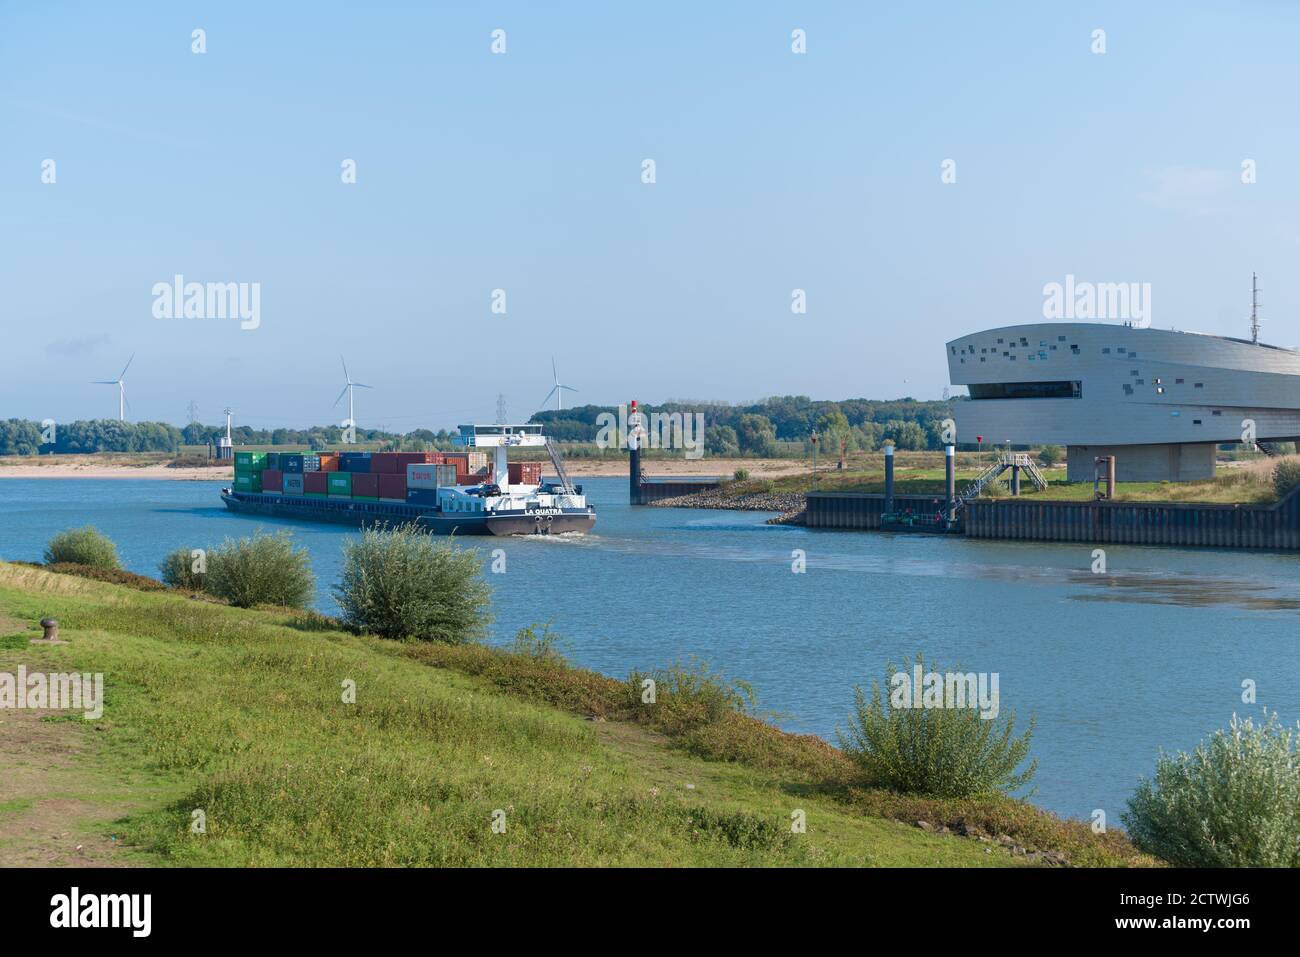 NIJMEGEN, NETHERLANDS - SEPTEMBER 12, 2020: container ship on the Maas-Waal canal at the water traffic control point Nijmegen Stock Photo